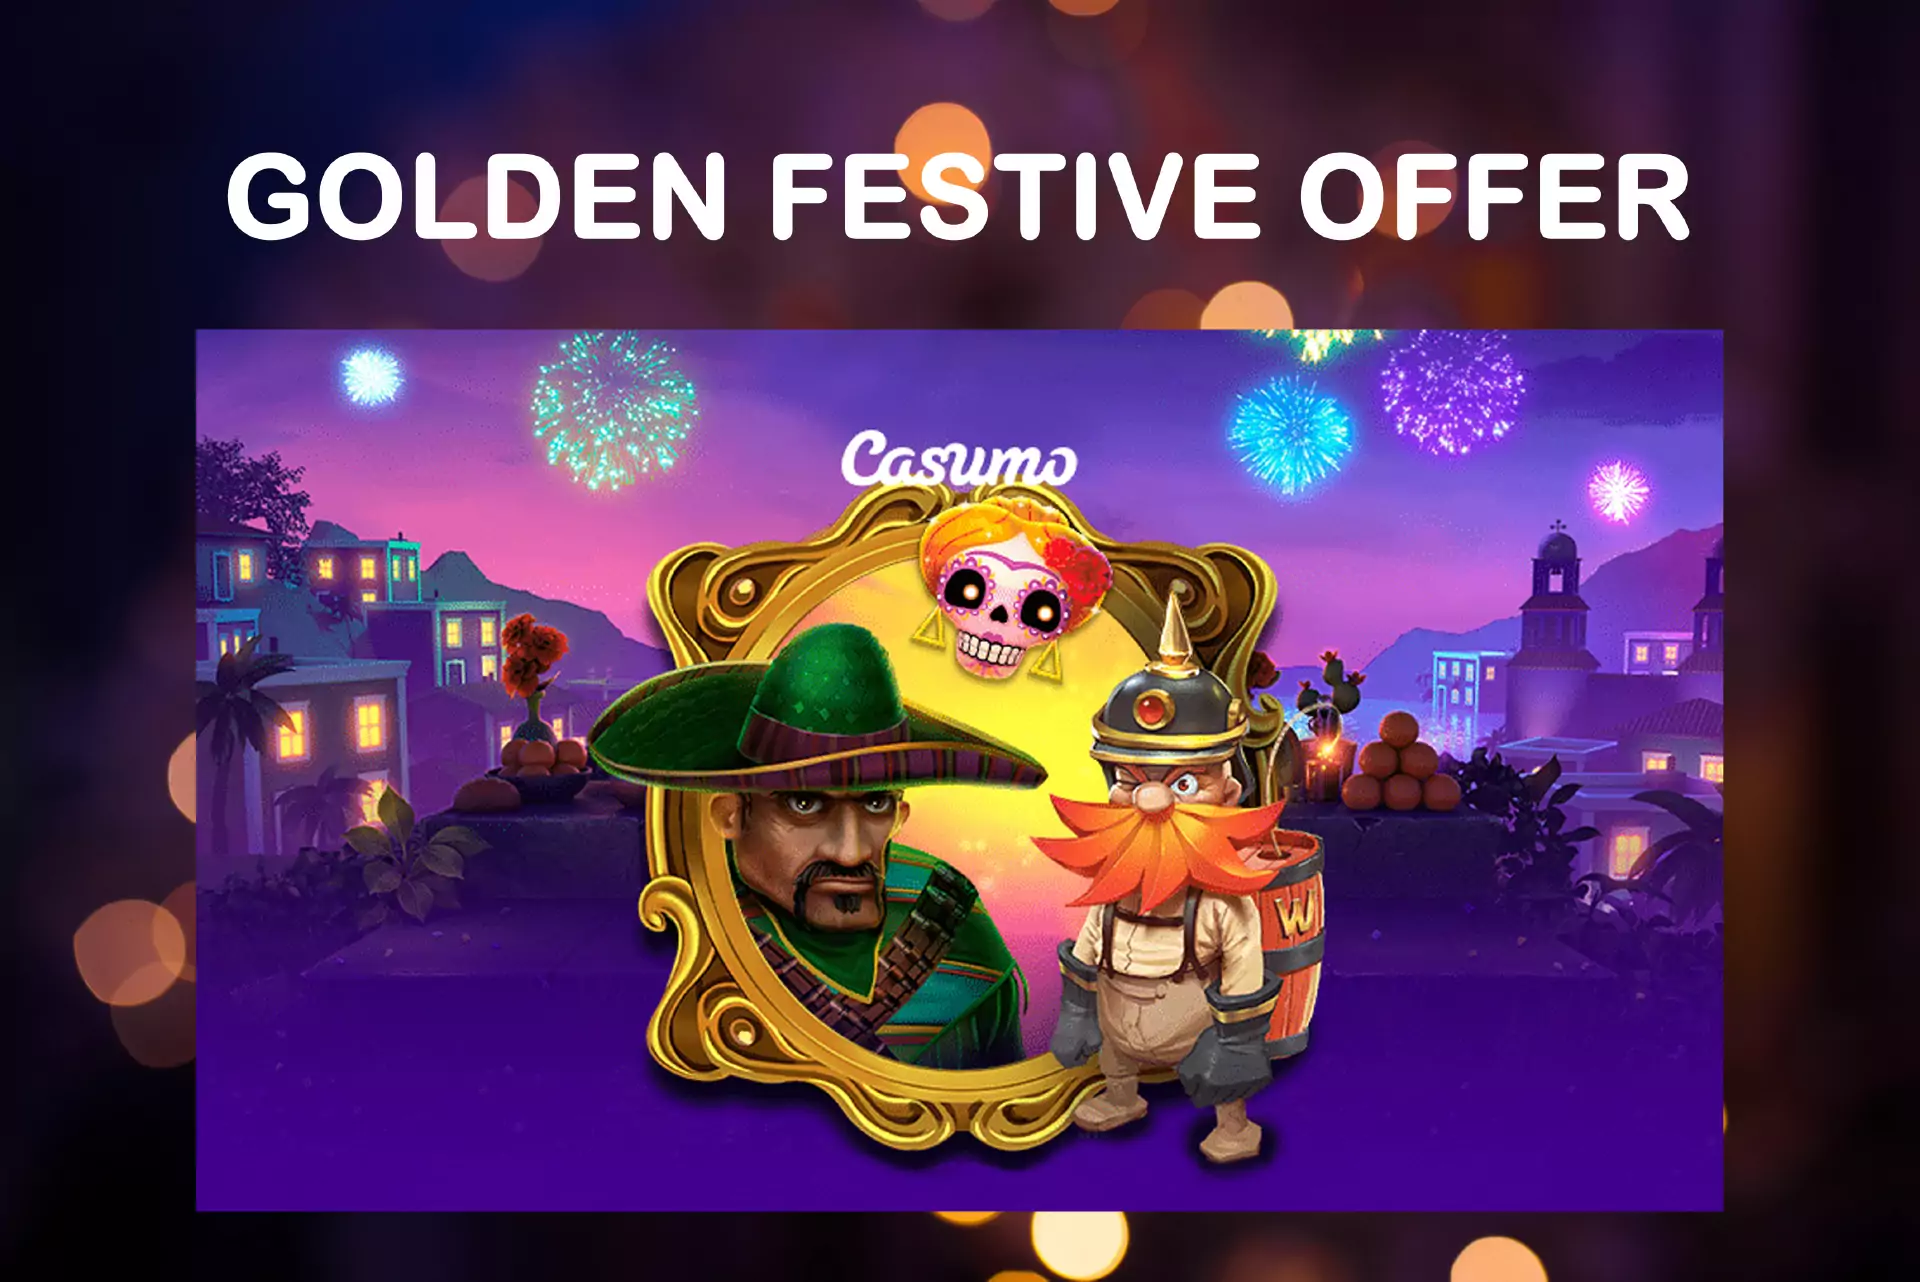 Top up your casino account to receive a huge bonus from Casumo.